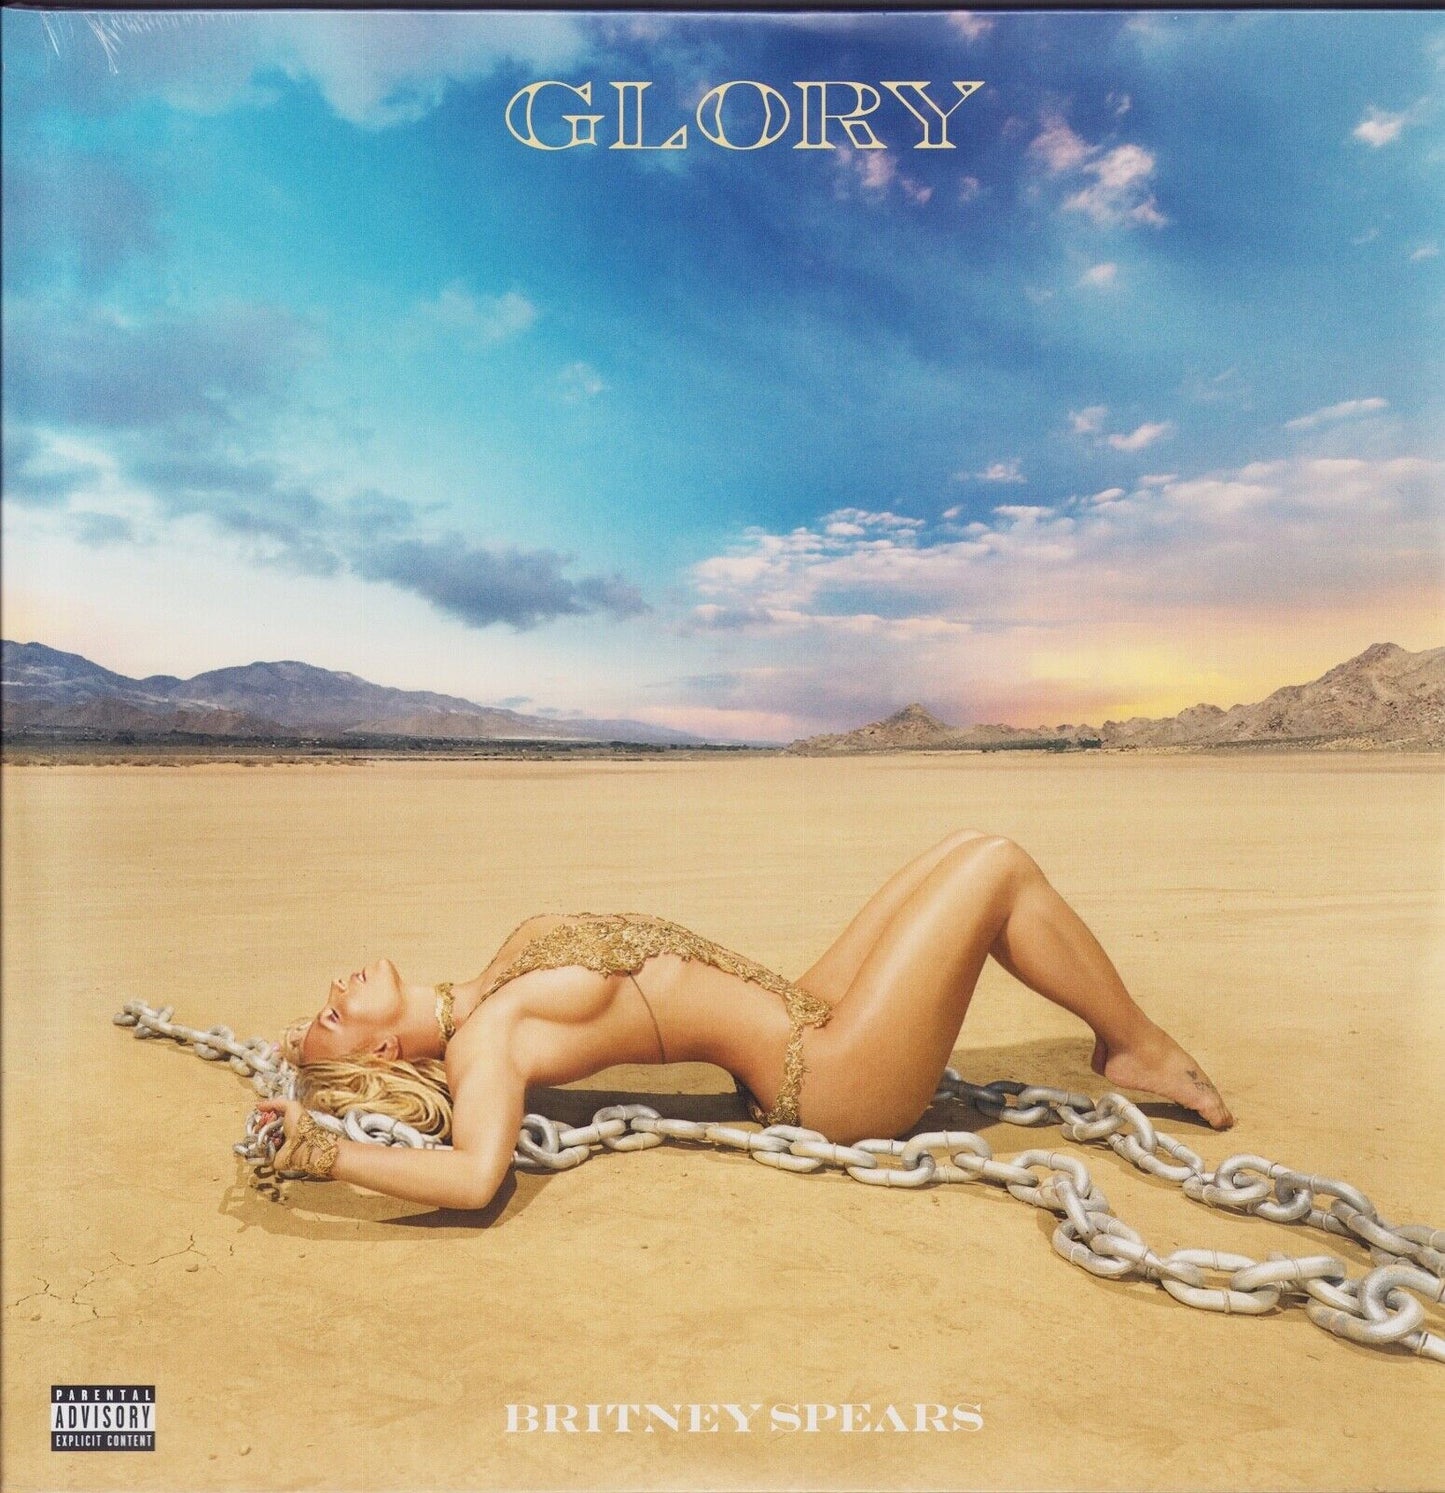 Britney Spears - Glory White Vinyl 2LP Deluxe & Limited Edition